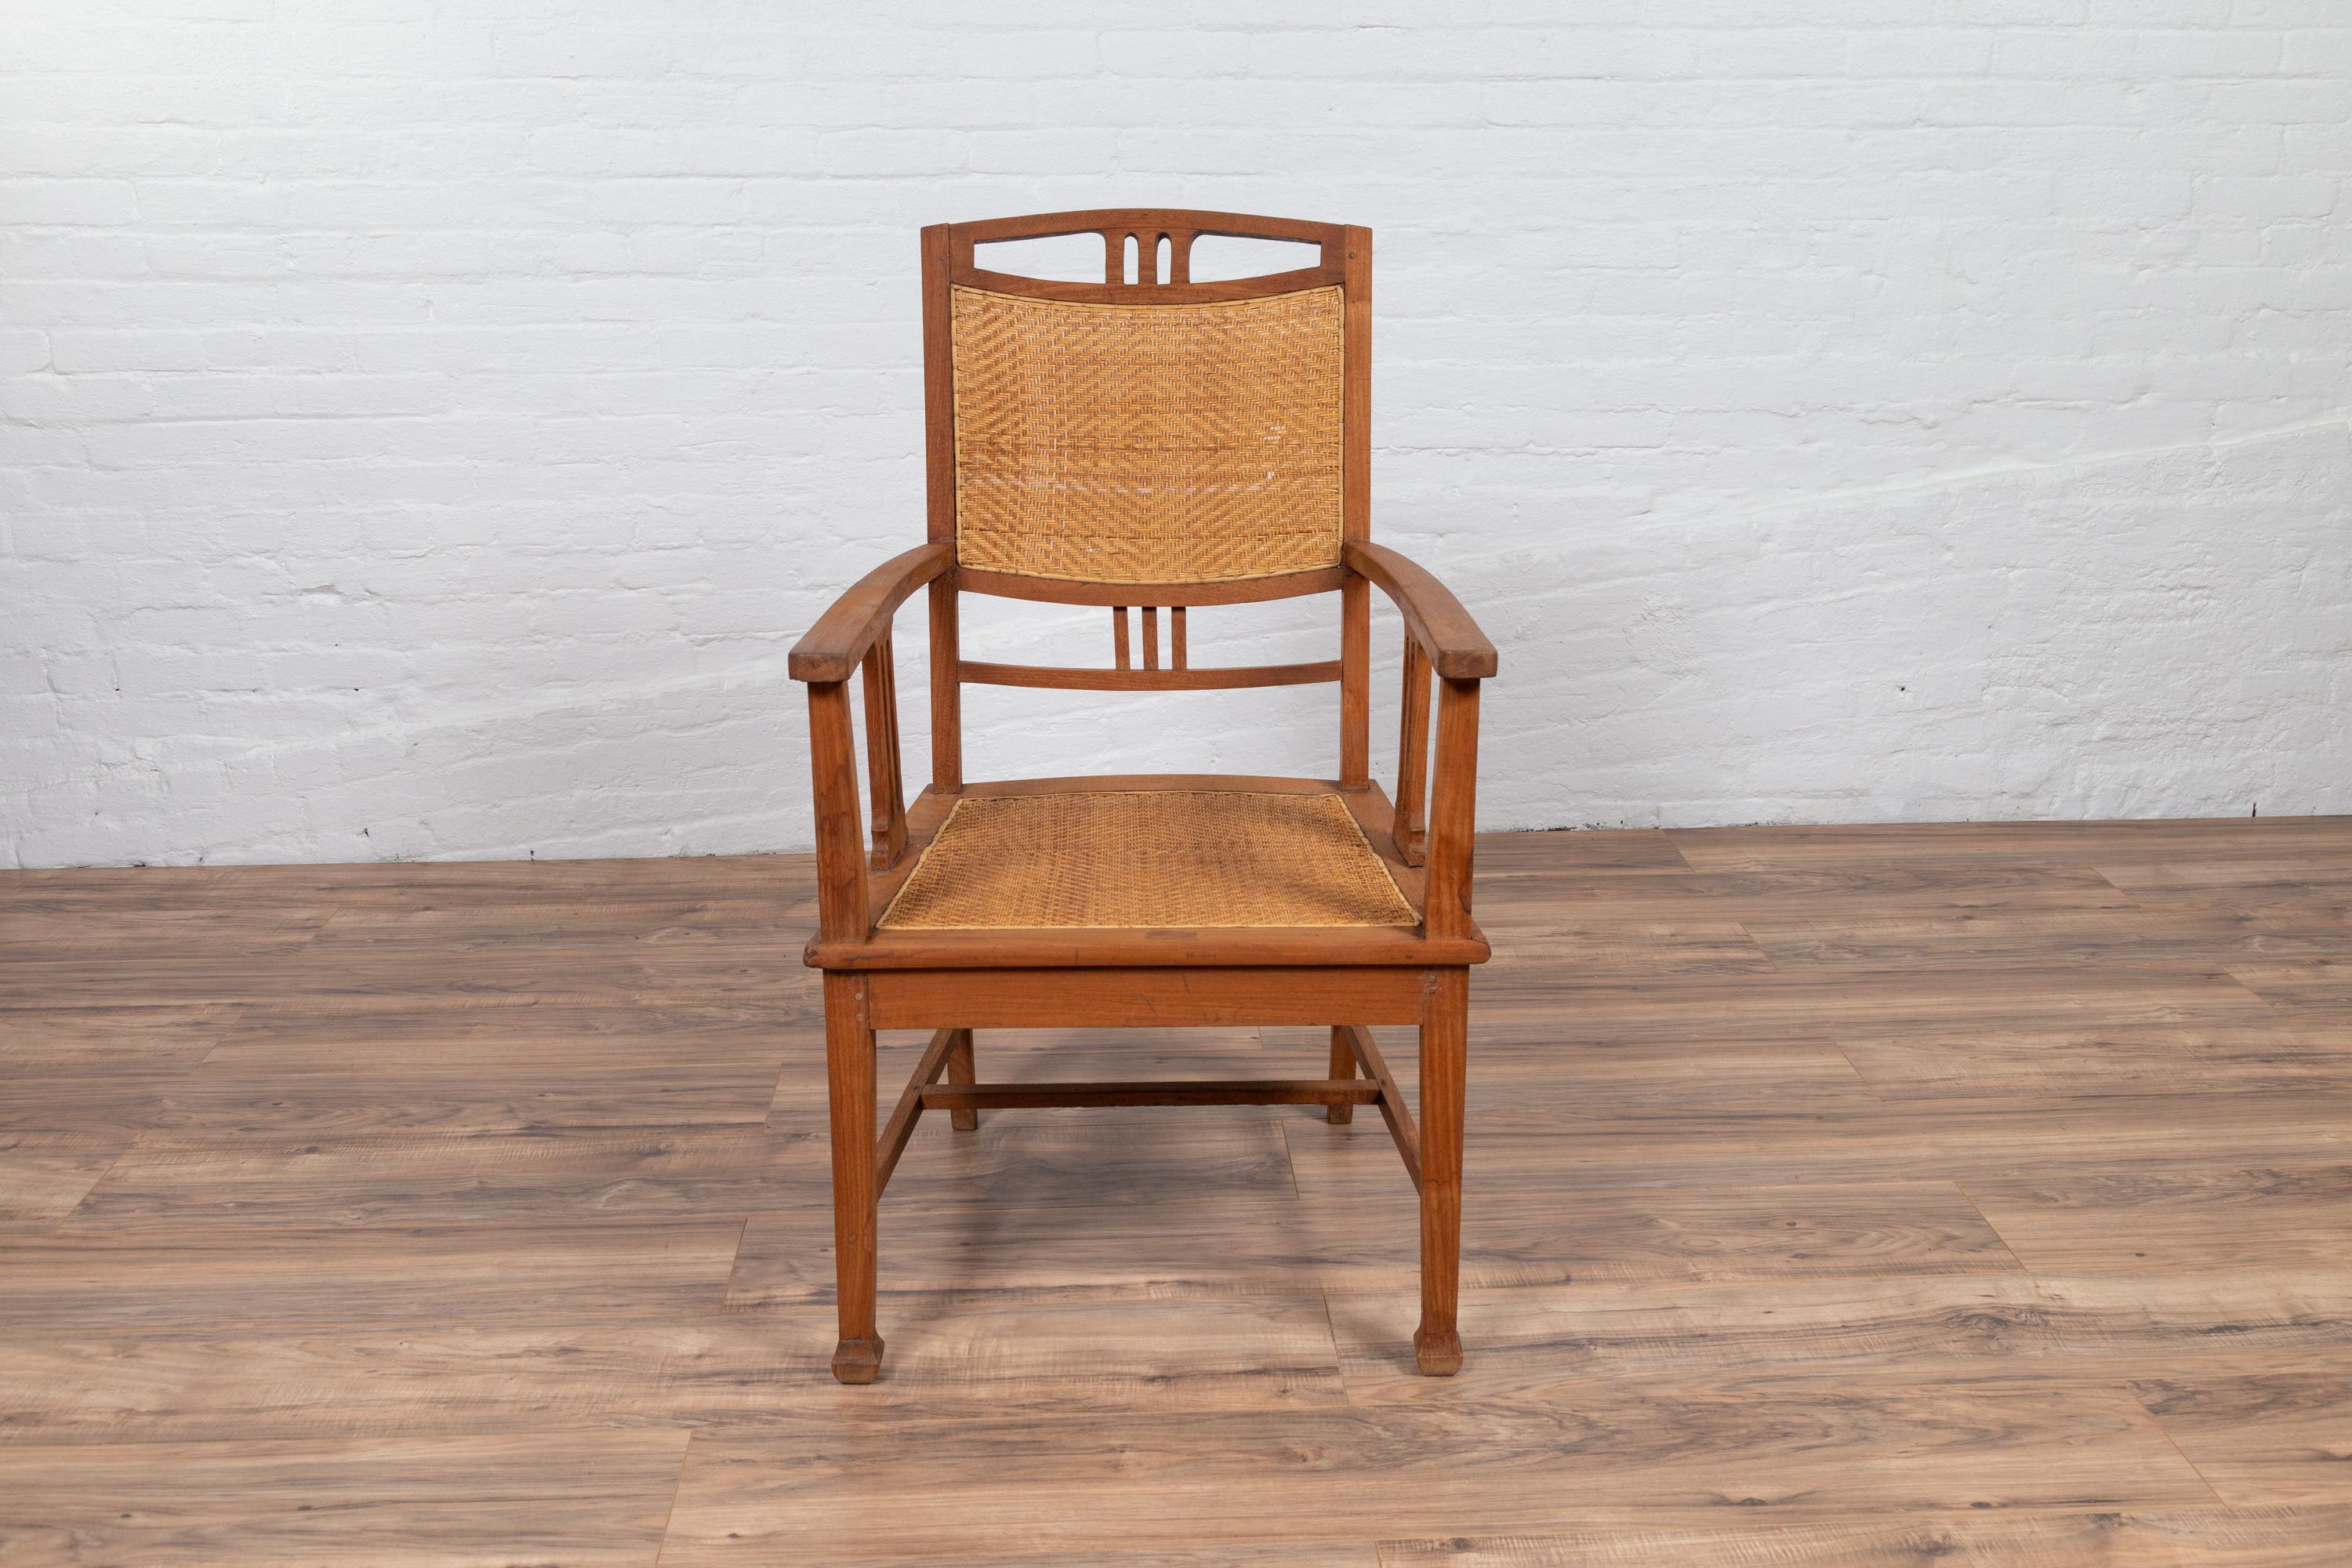 Antique Javanese Dutch colonial teak wood armchair from the early 20th century, with rattan seat and triglyph inspired motifs. We currently have two available, priced and sold individually. Born on the island of Java during the early years of the